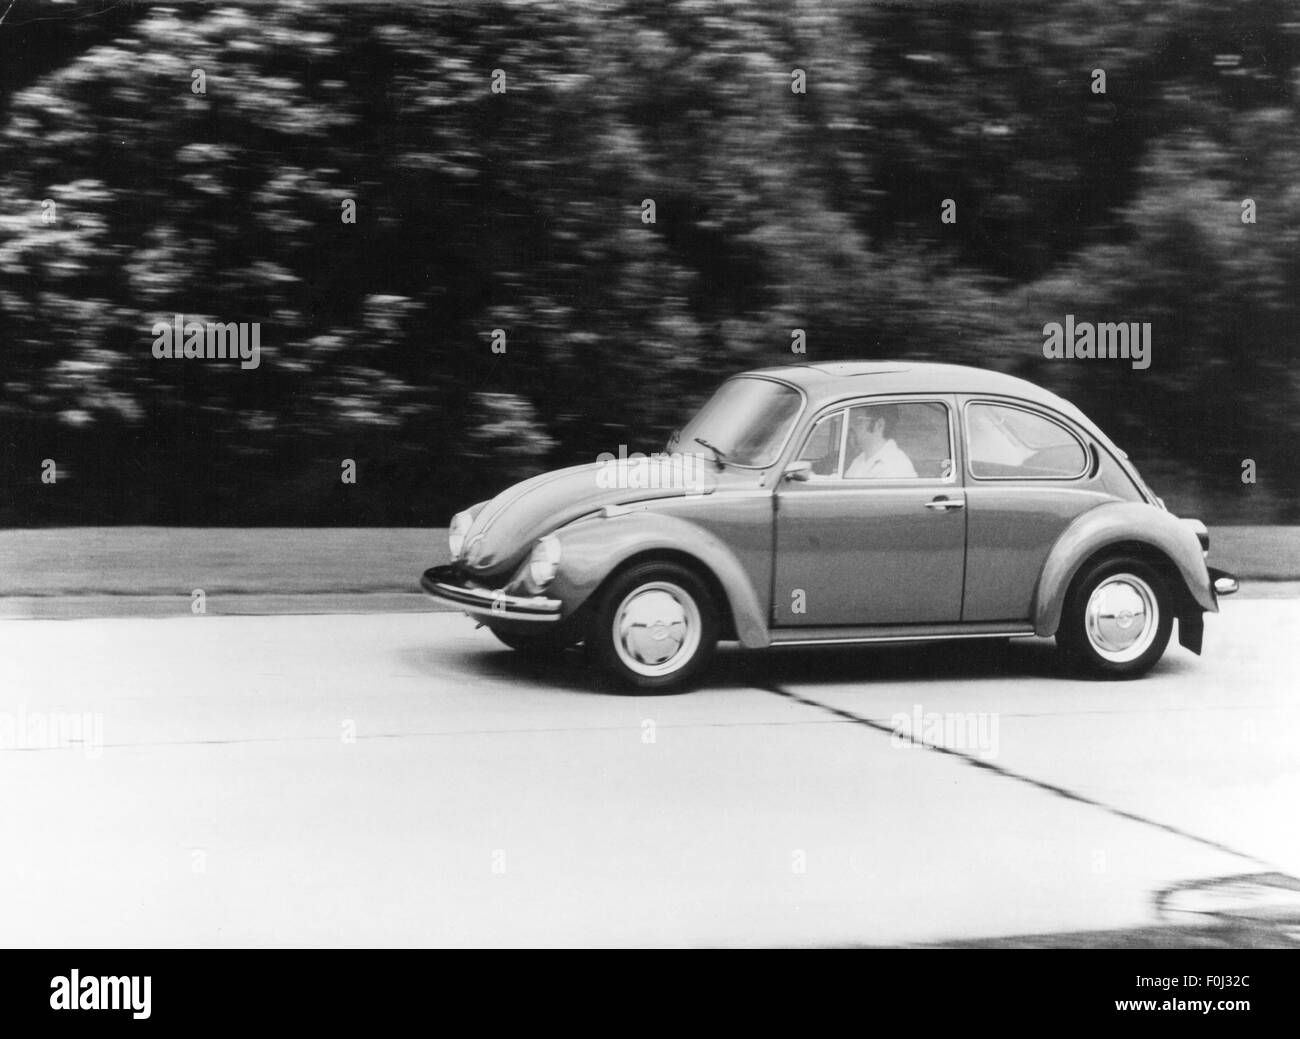 Transport / Transport, Auto, Fahrzeugvarianten, Volkswagen, VW 1303 Beetle, 1972, Additional-Rights-Clearences-not available Stockfoto